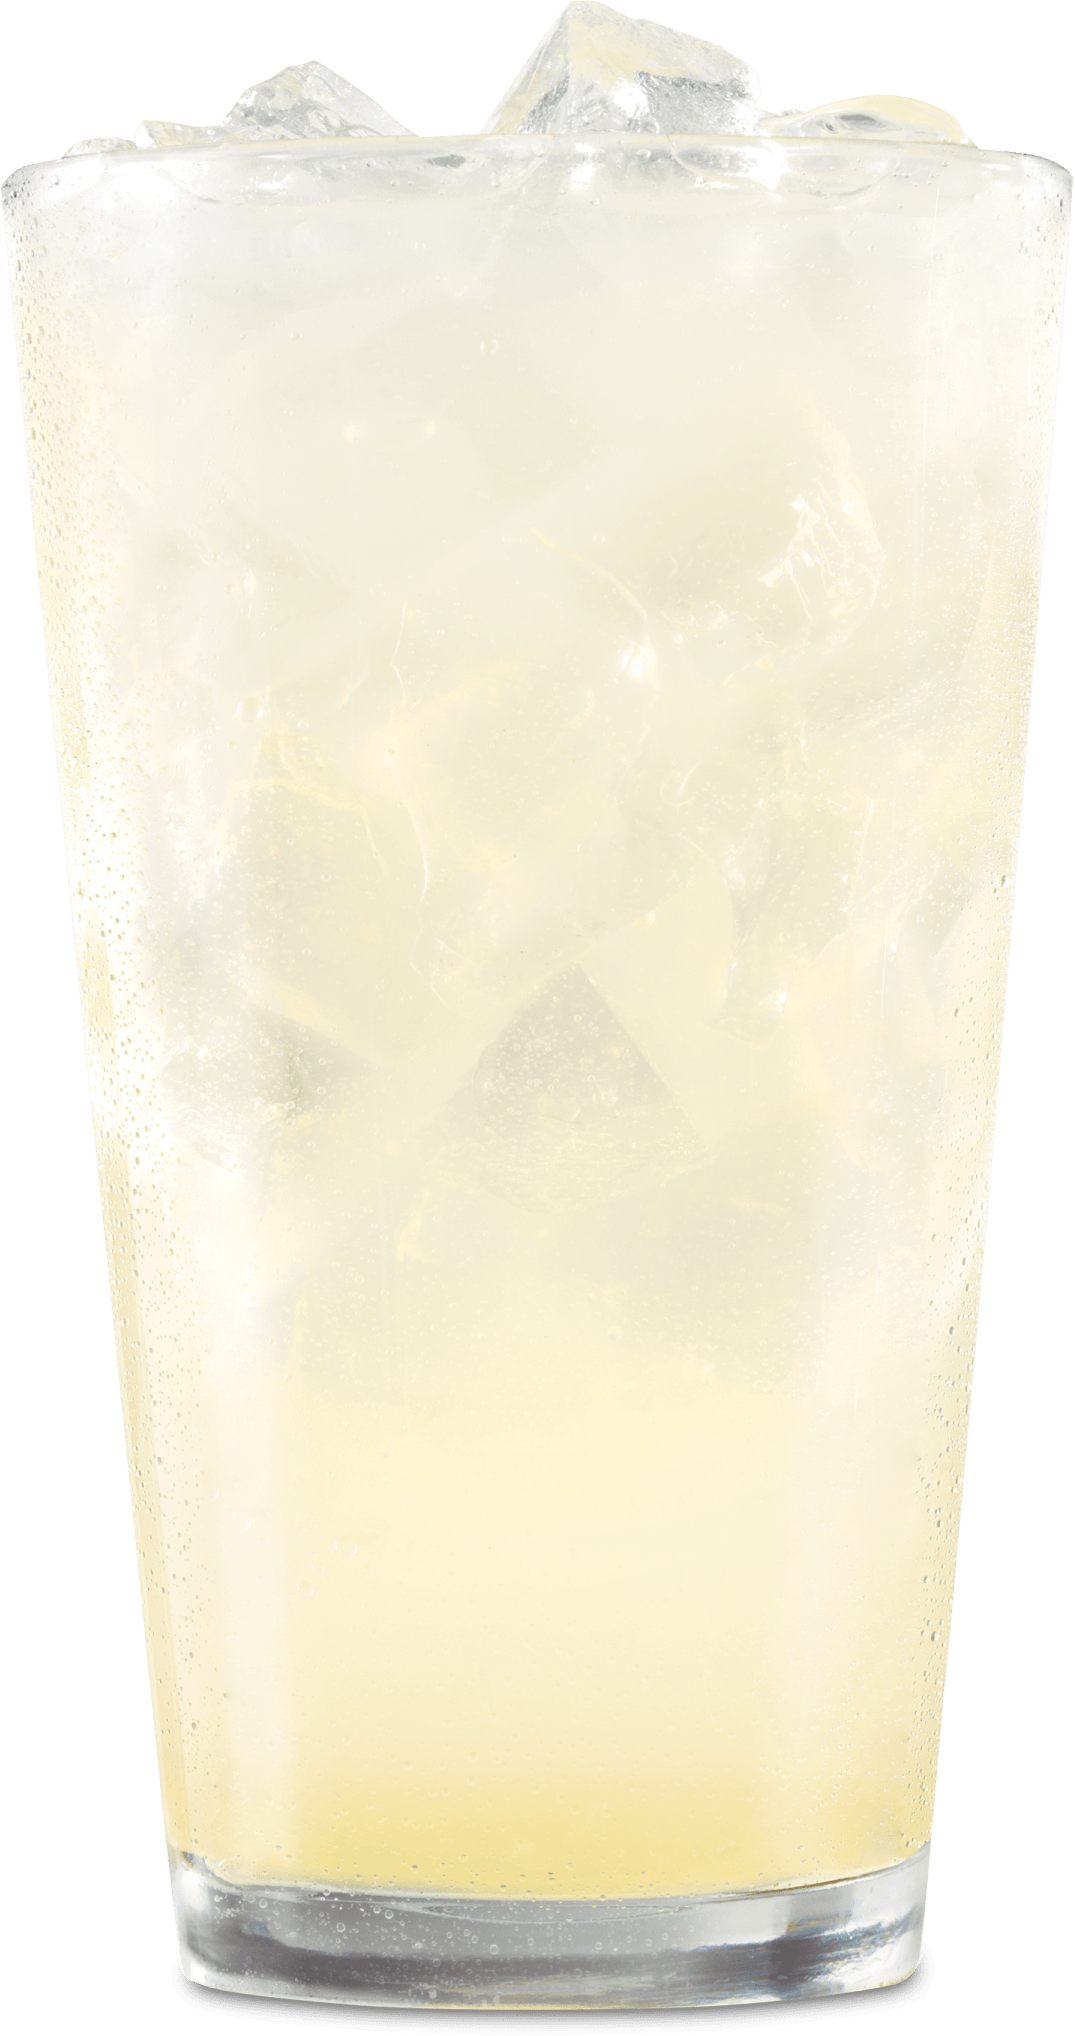 Arby's Classic Lemonade Nutrition Facts